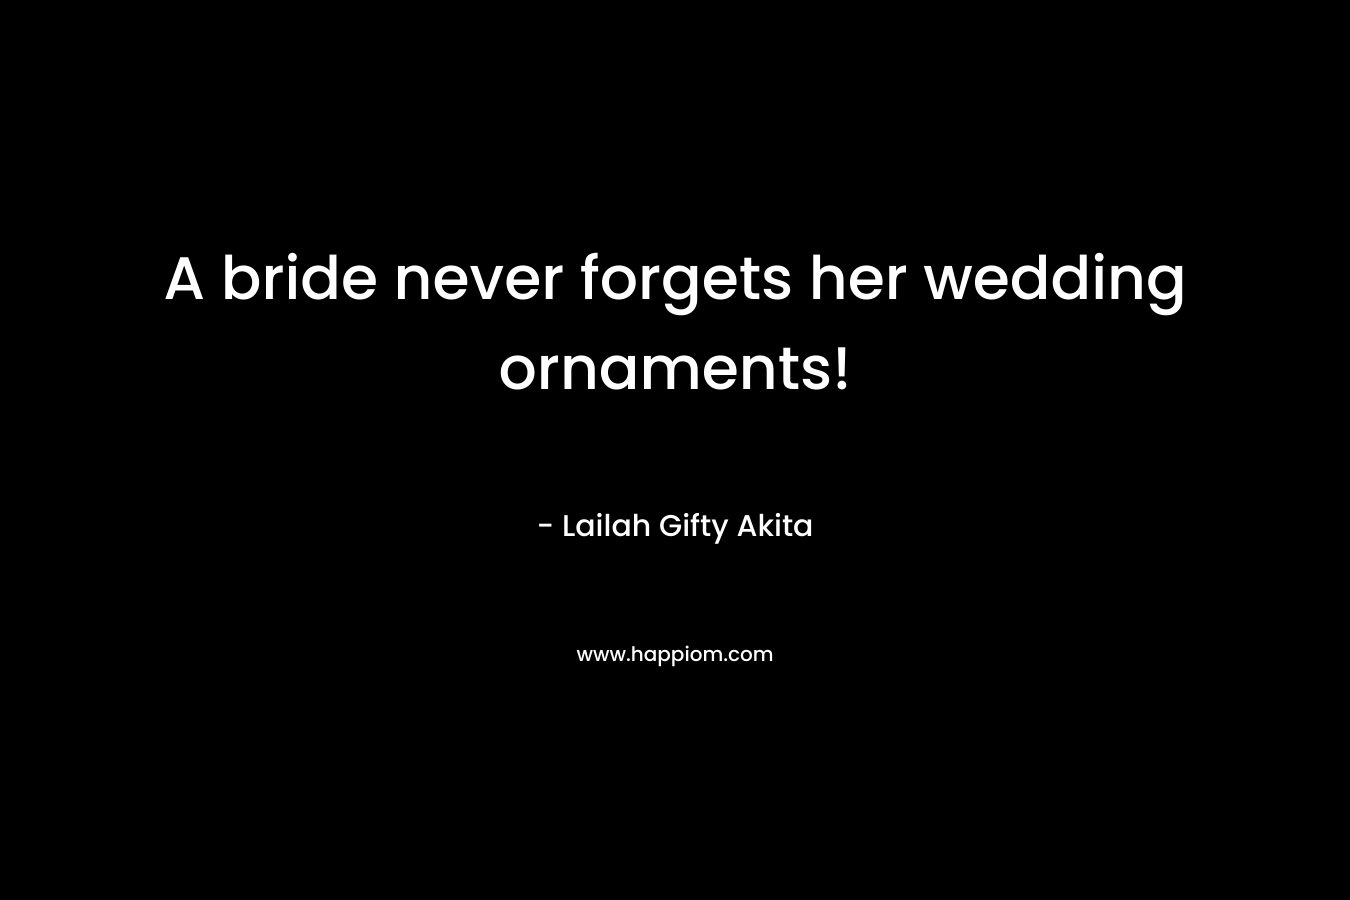 A bride never forgets her wedding ornaments! – Lailah Gifty Akita